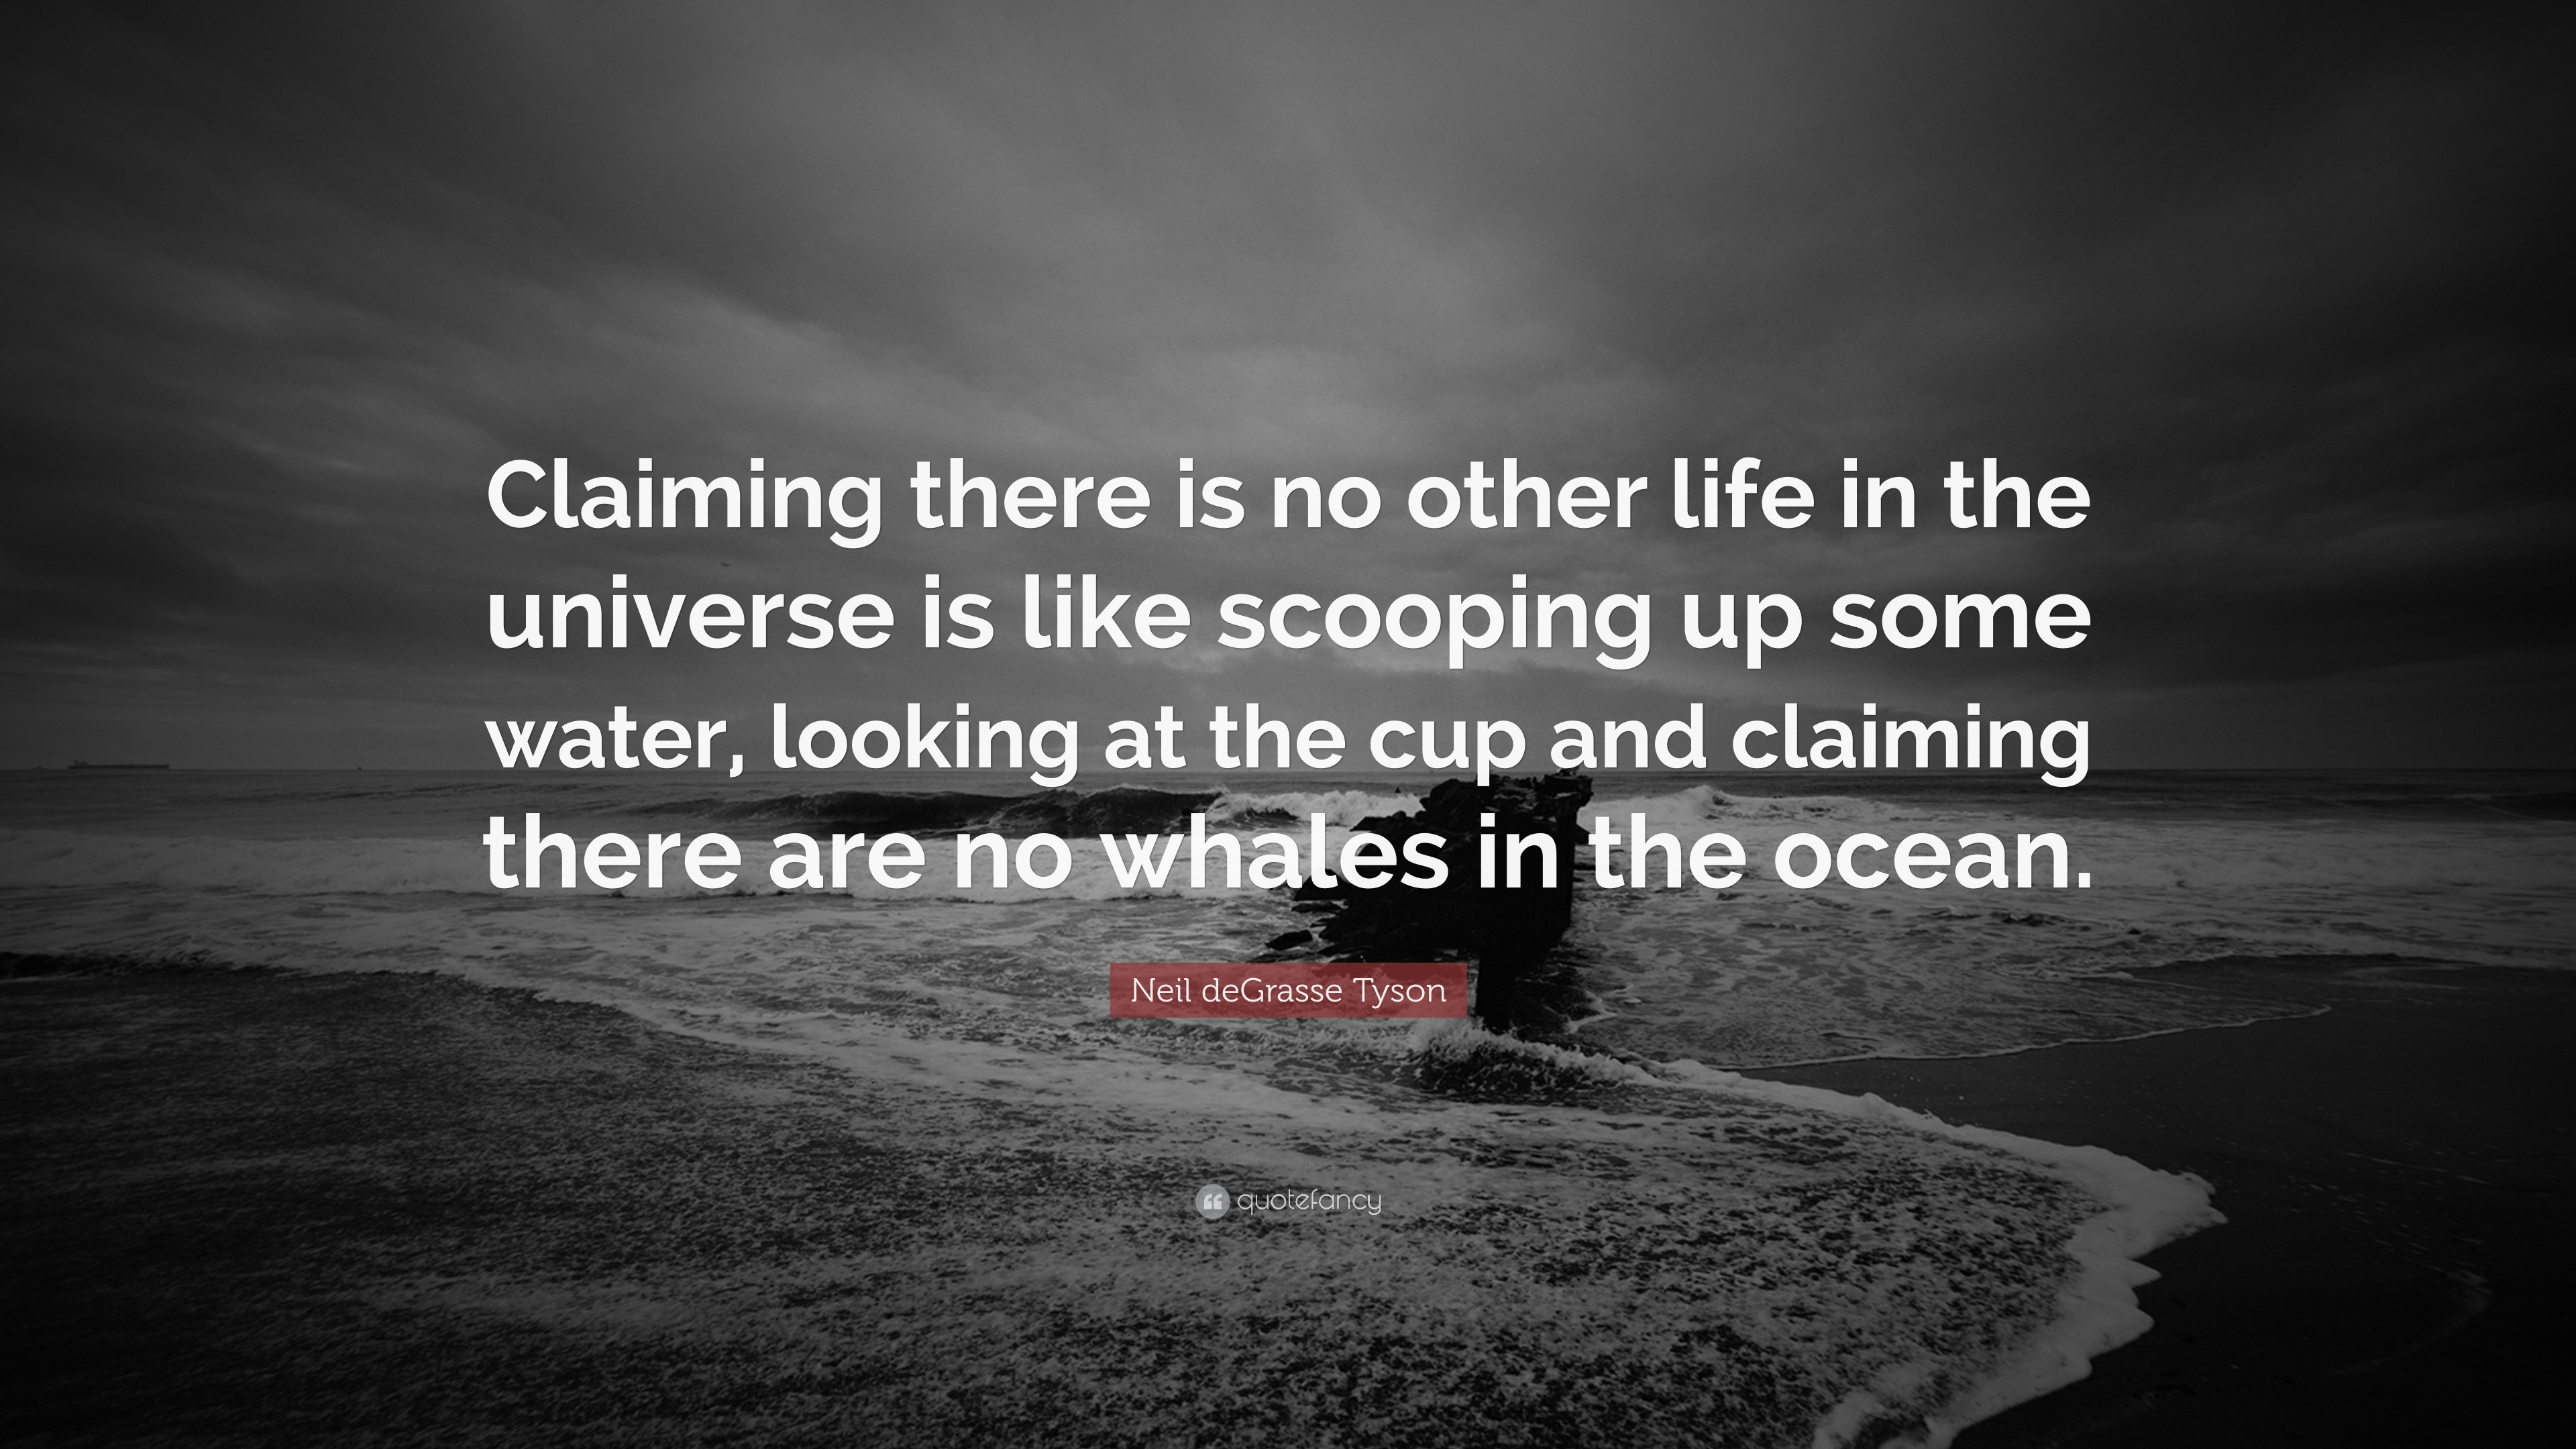 Neil deGrasse Tyson Quote: “Claiming there is no other life in the